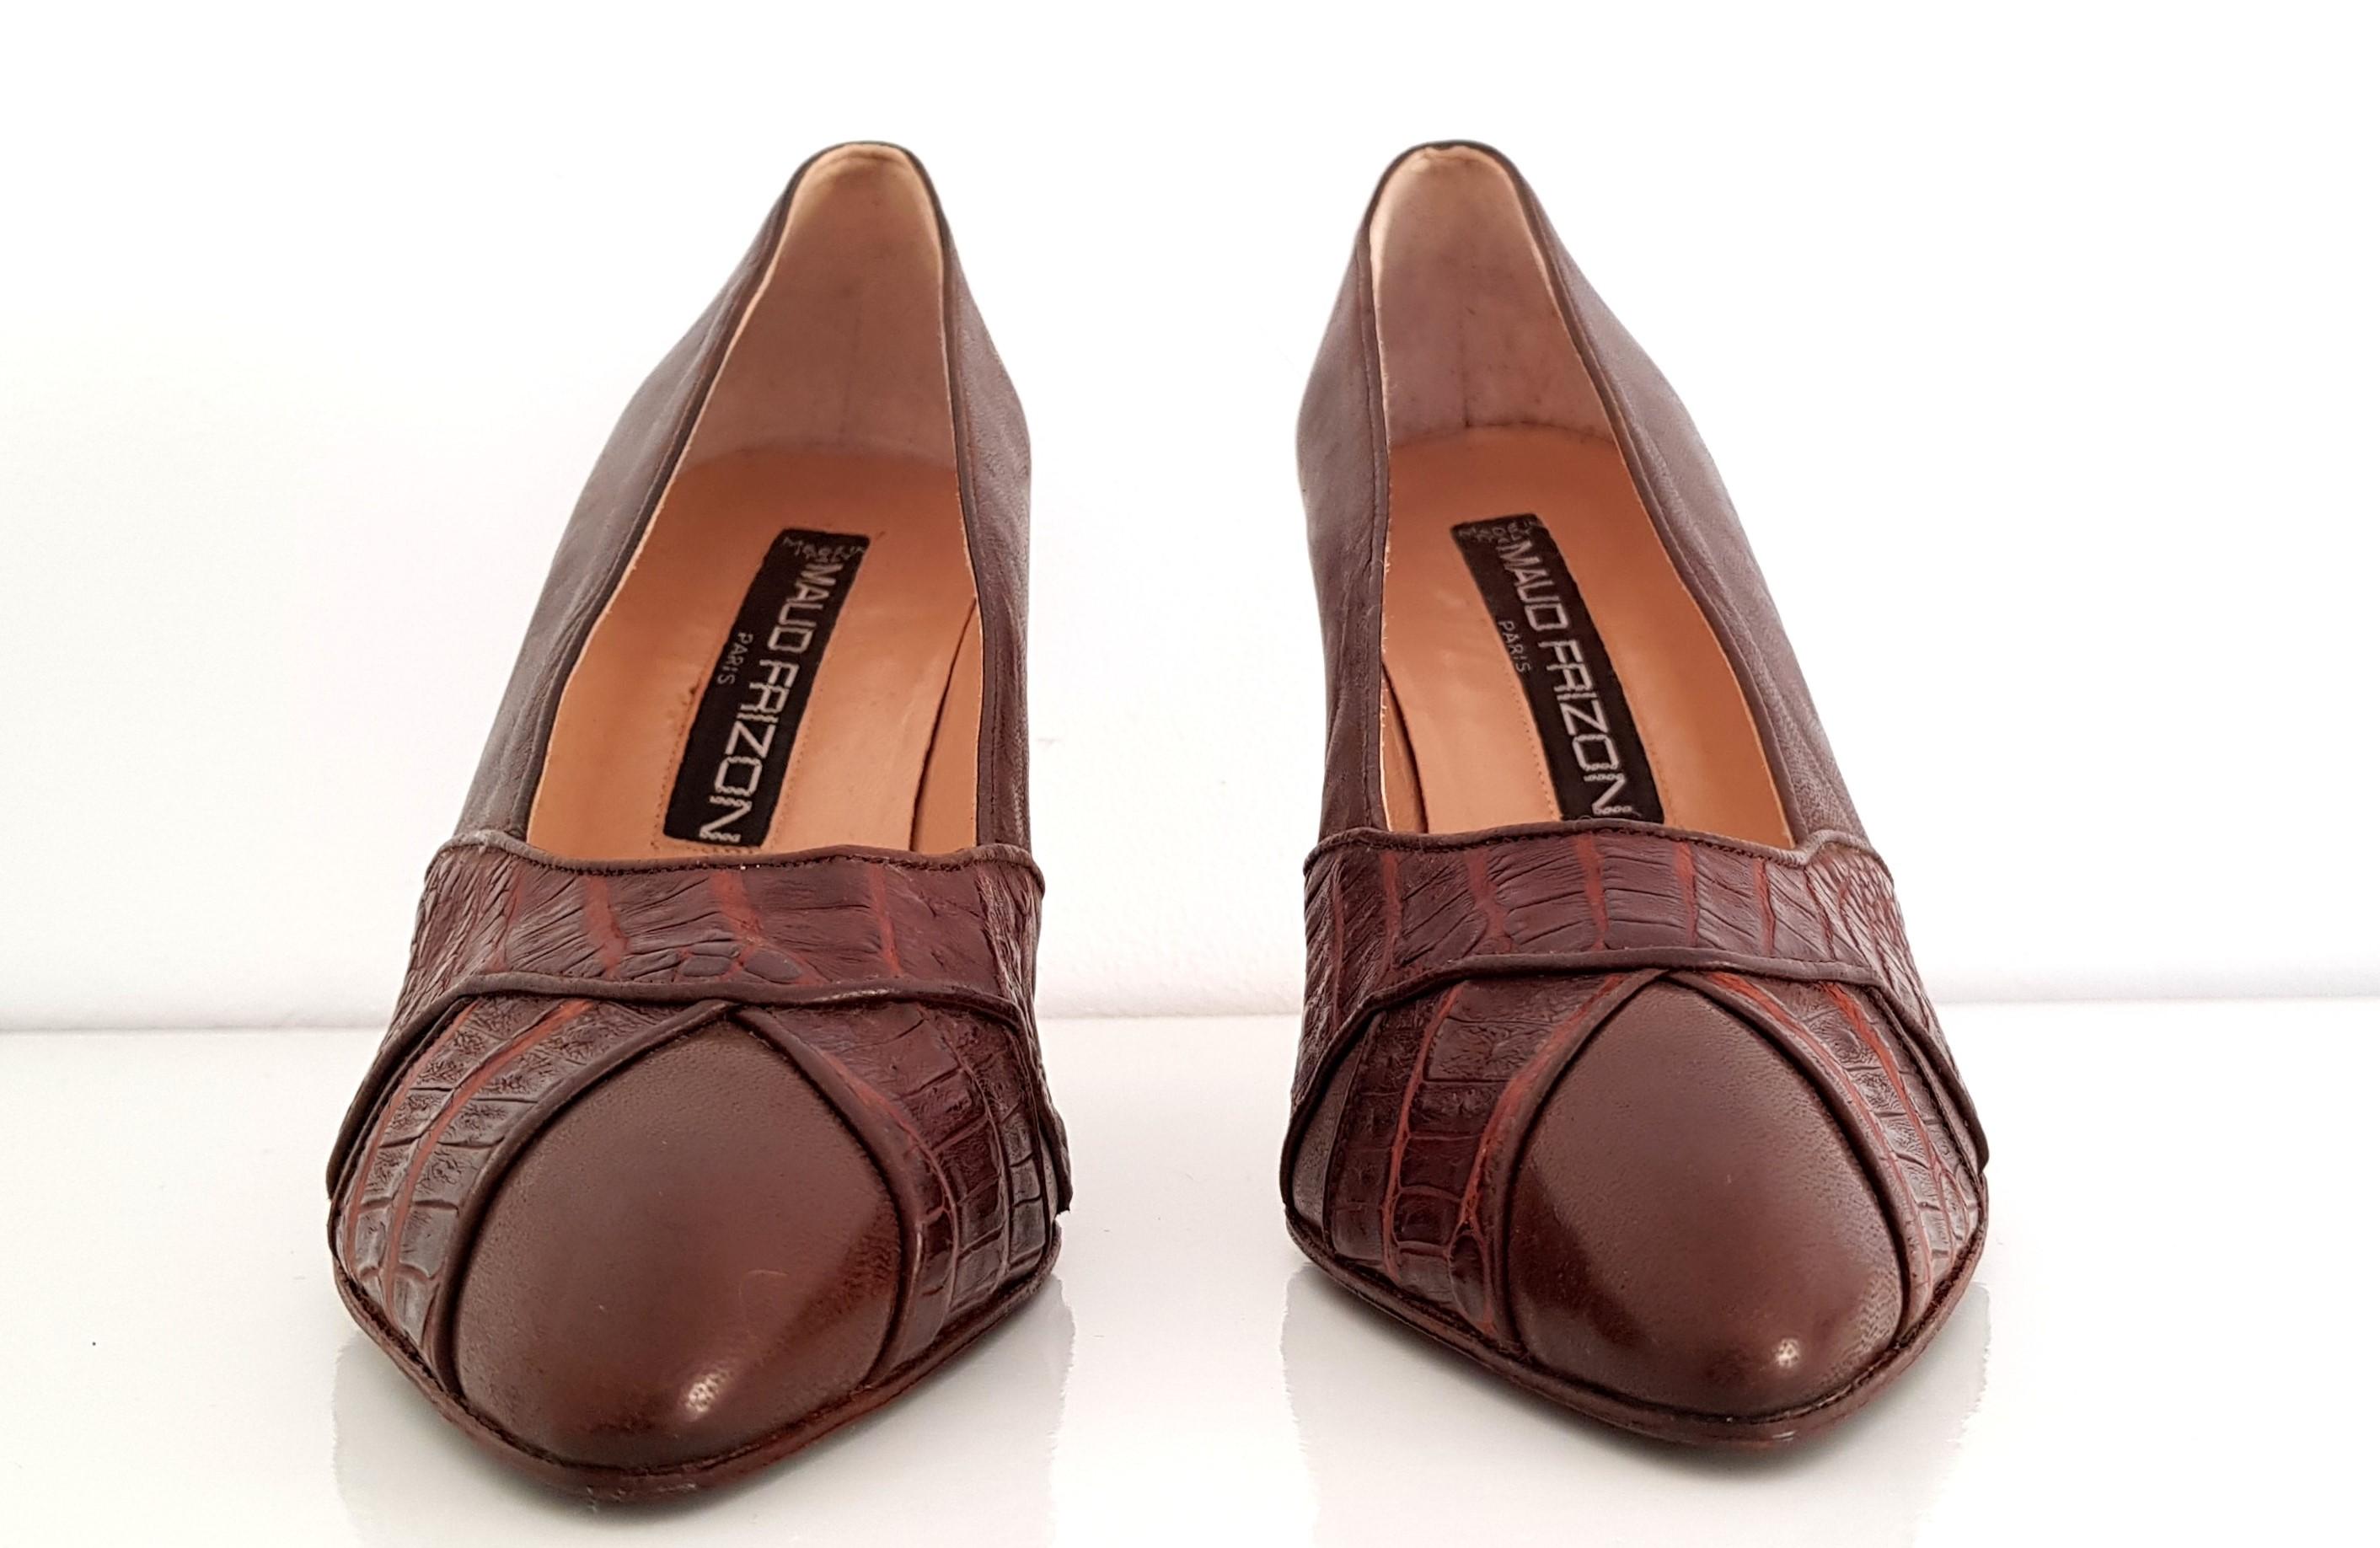 Beautiful, Rare and Unique Maud Frizon Heels
Wild Crocodile Leather and Wooden Sole
Conditions: NEW, perfect conditions.
Heel height: 9 cm
Size 39 (EU)
Made in Italy